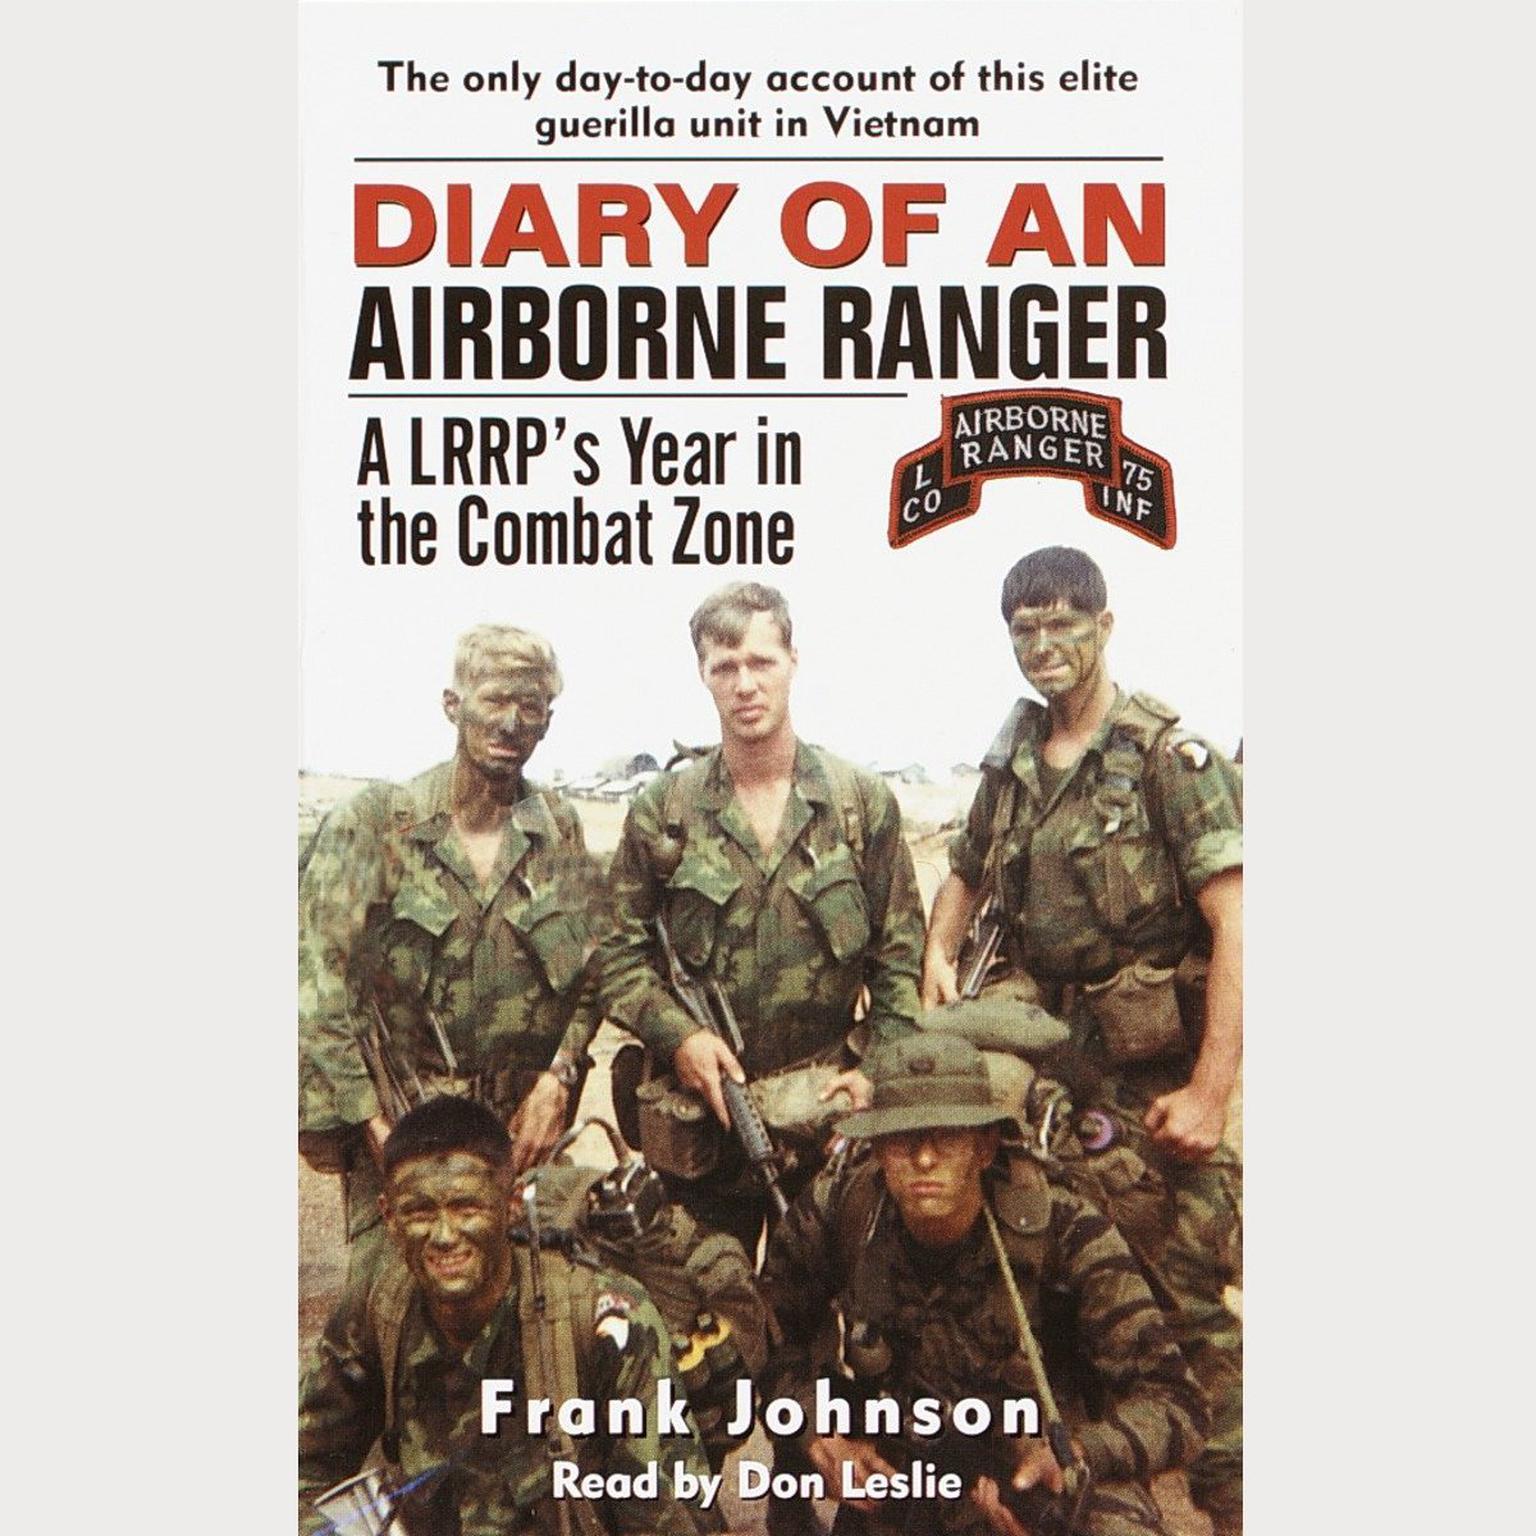 Diary of an Airborne Ranger (Abridged): A LRRPs Year in the Combat Zone Audiobook, by Frank Johnson